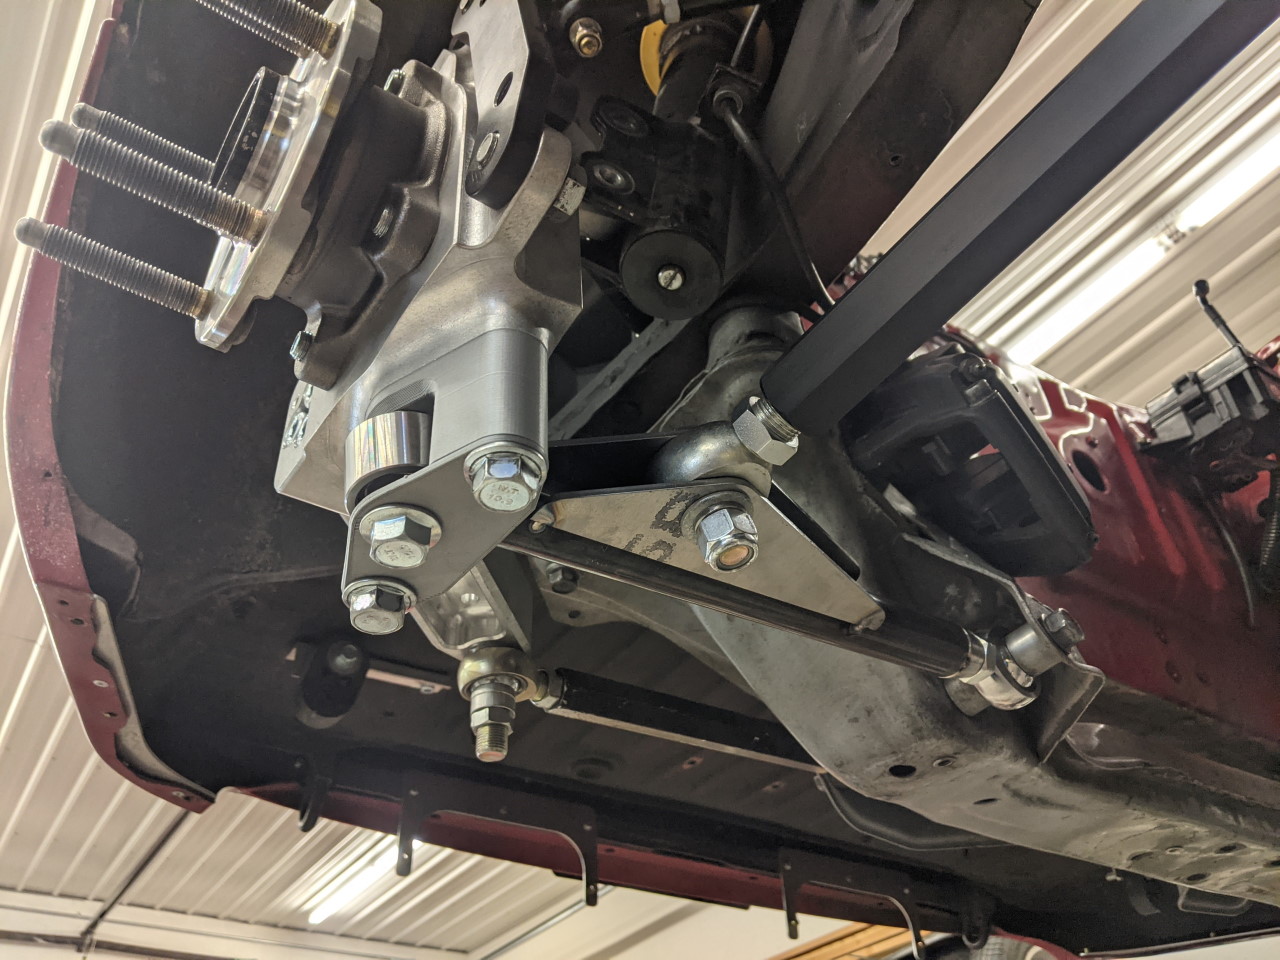 New double shear lower ball joint design